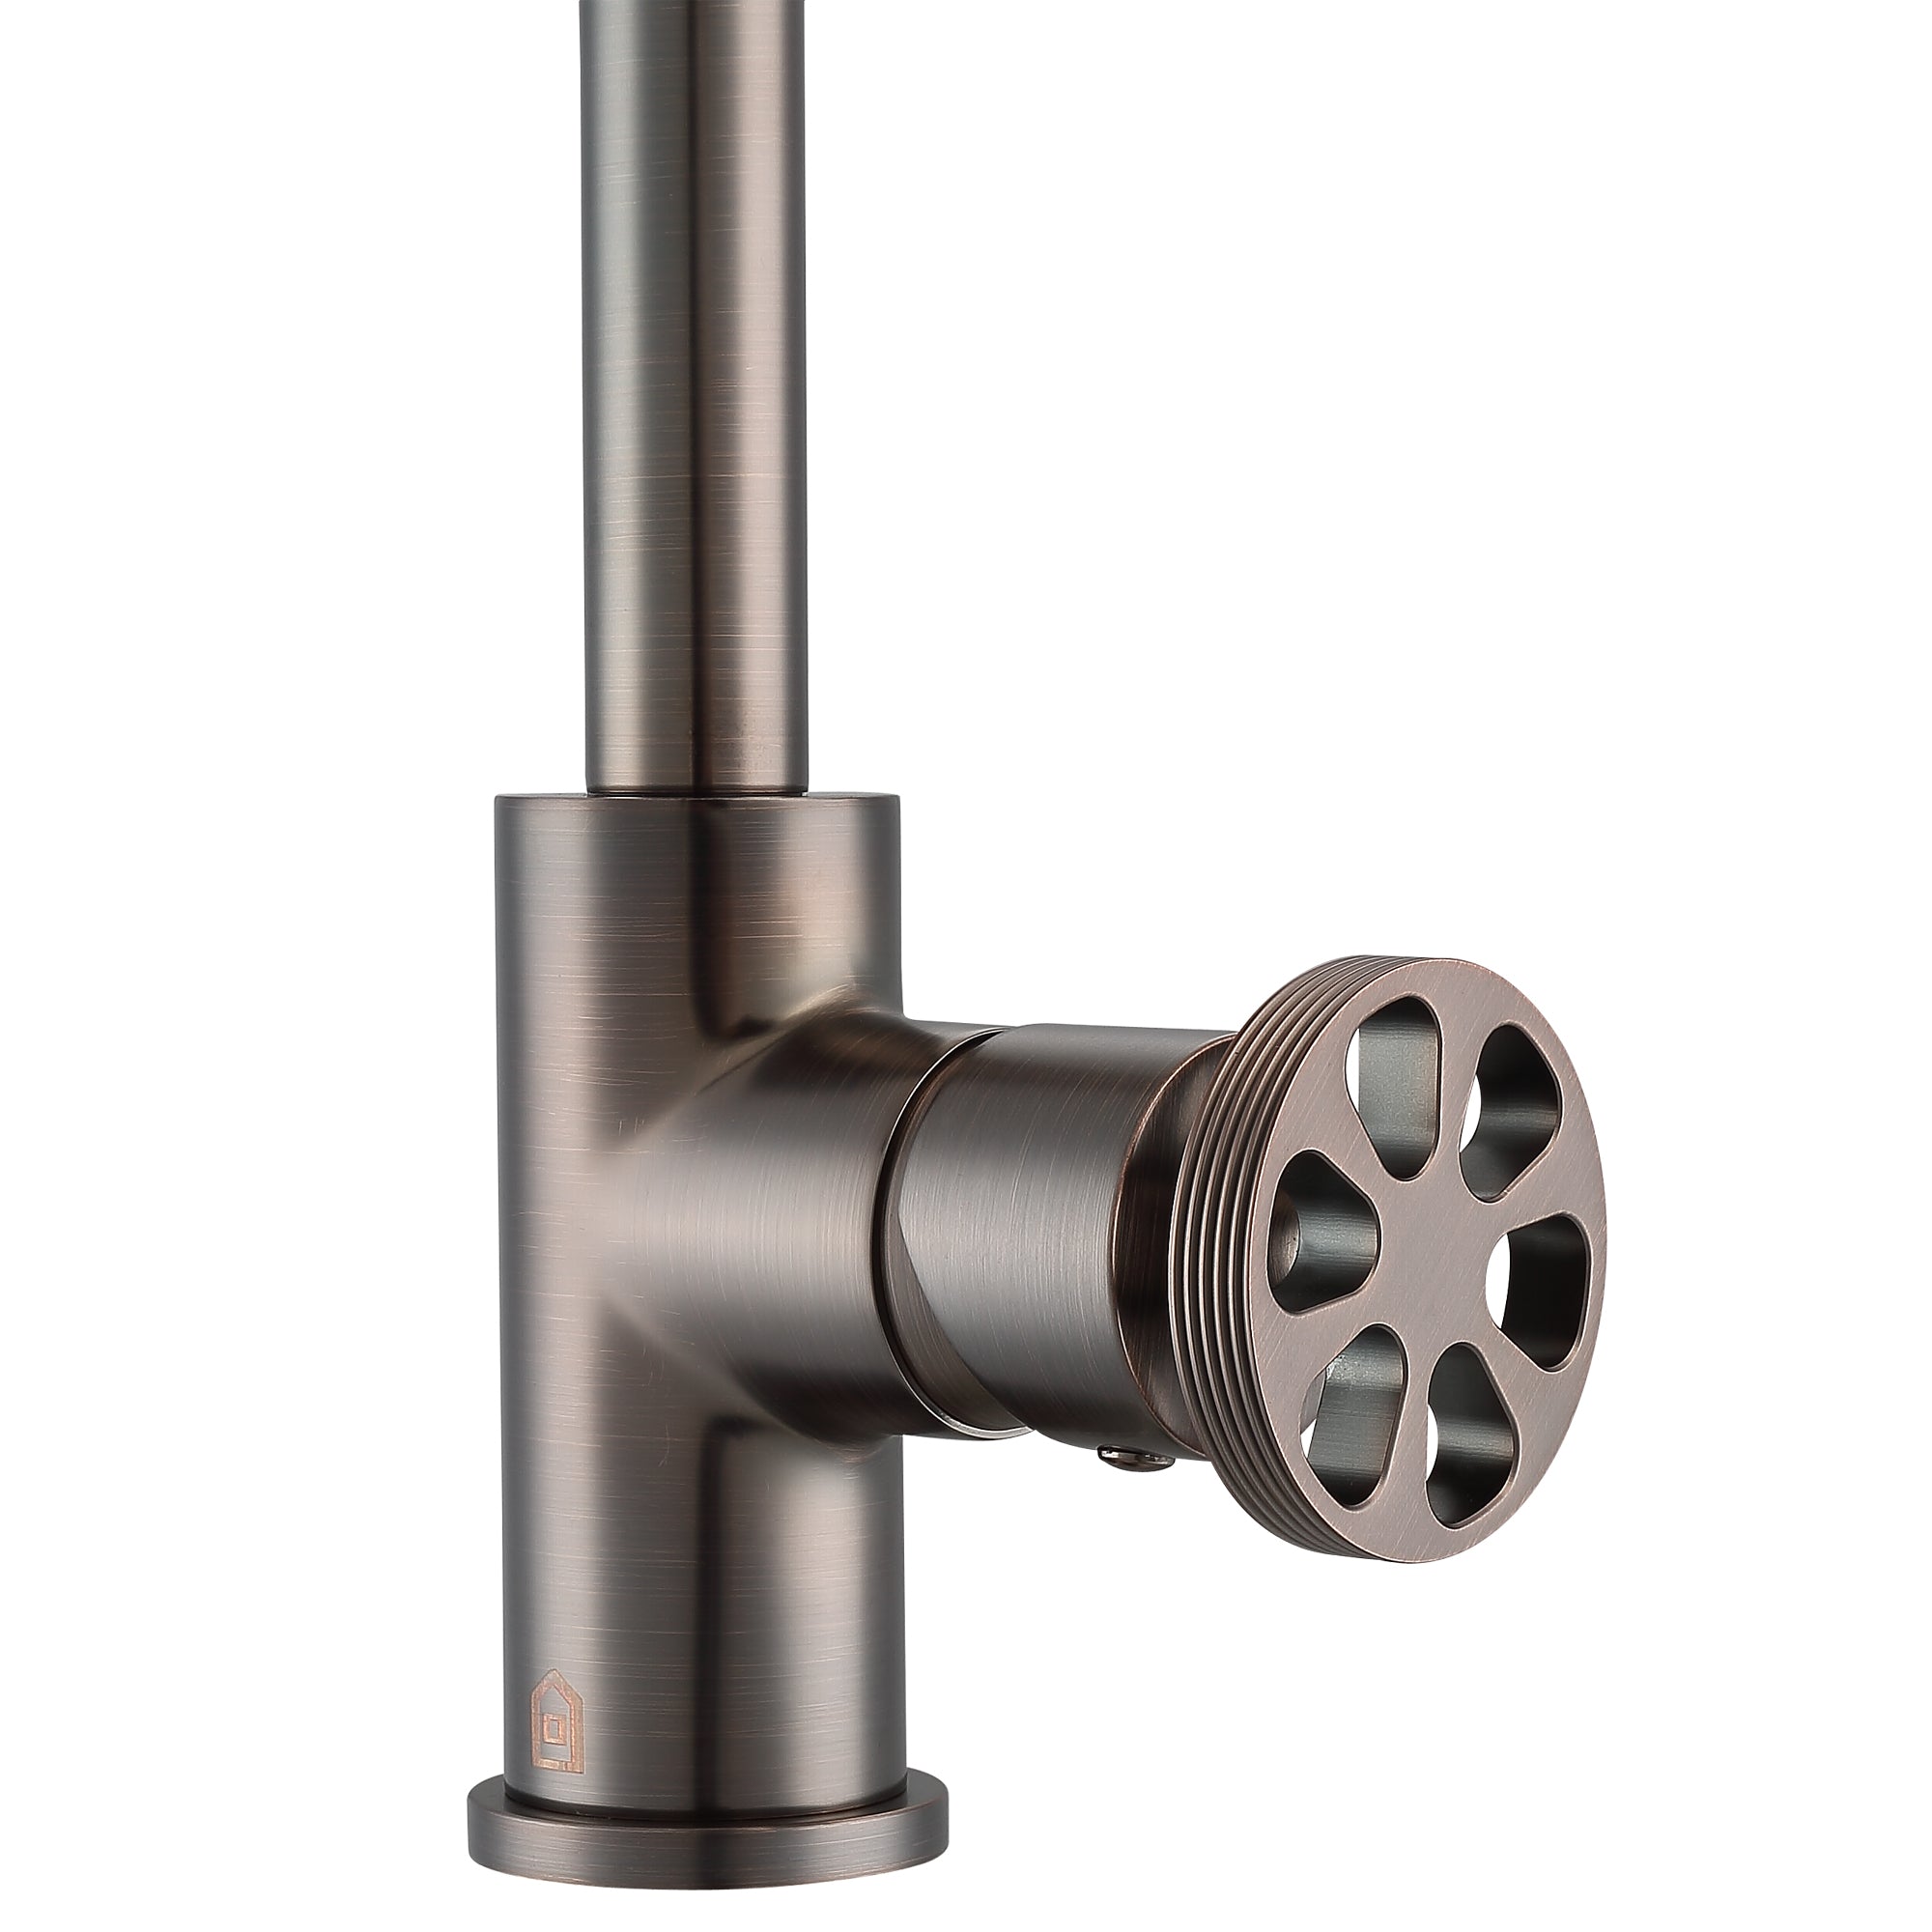 Ancona Urban Deck Mount Round Wheel Handle 1-Hole Bathroom Faucet in Oil-Rubbed Bronze